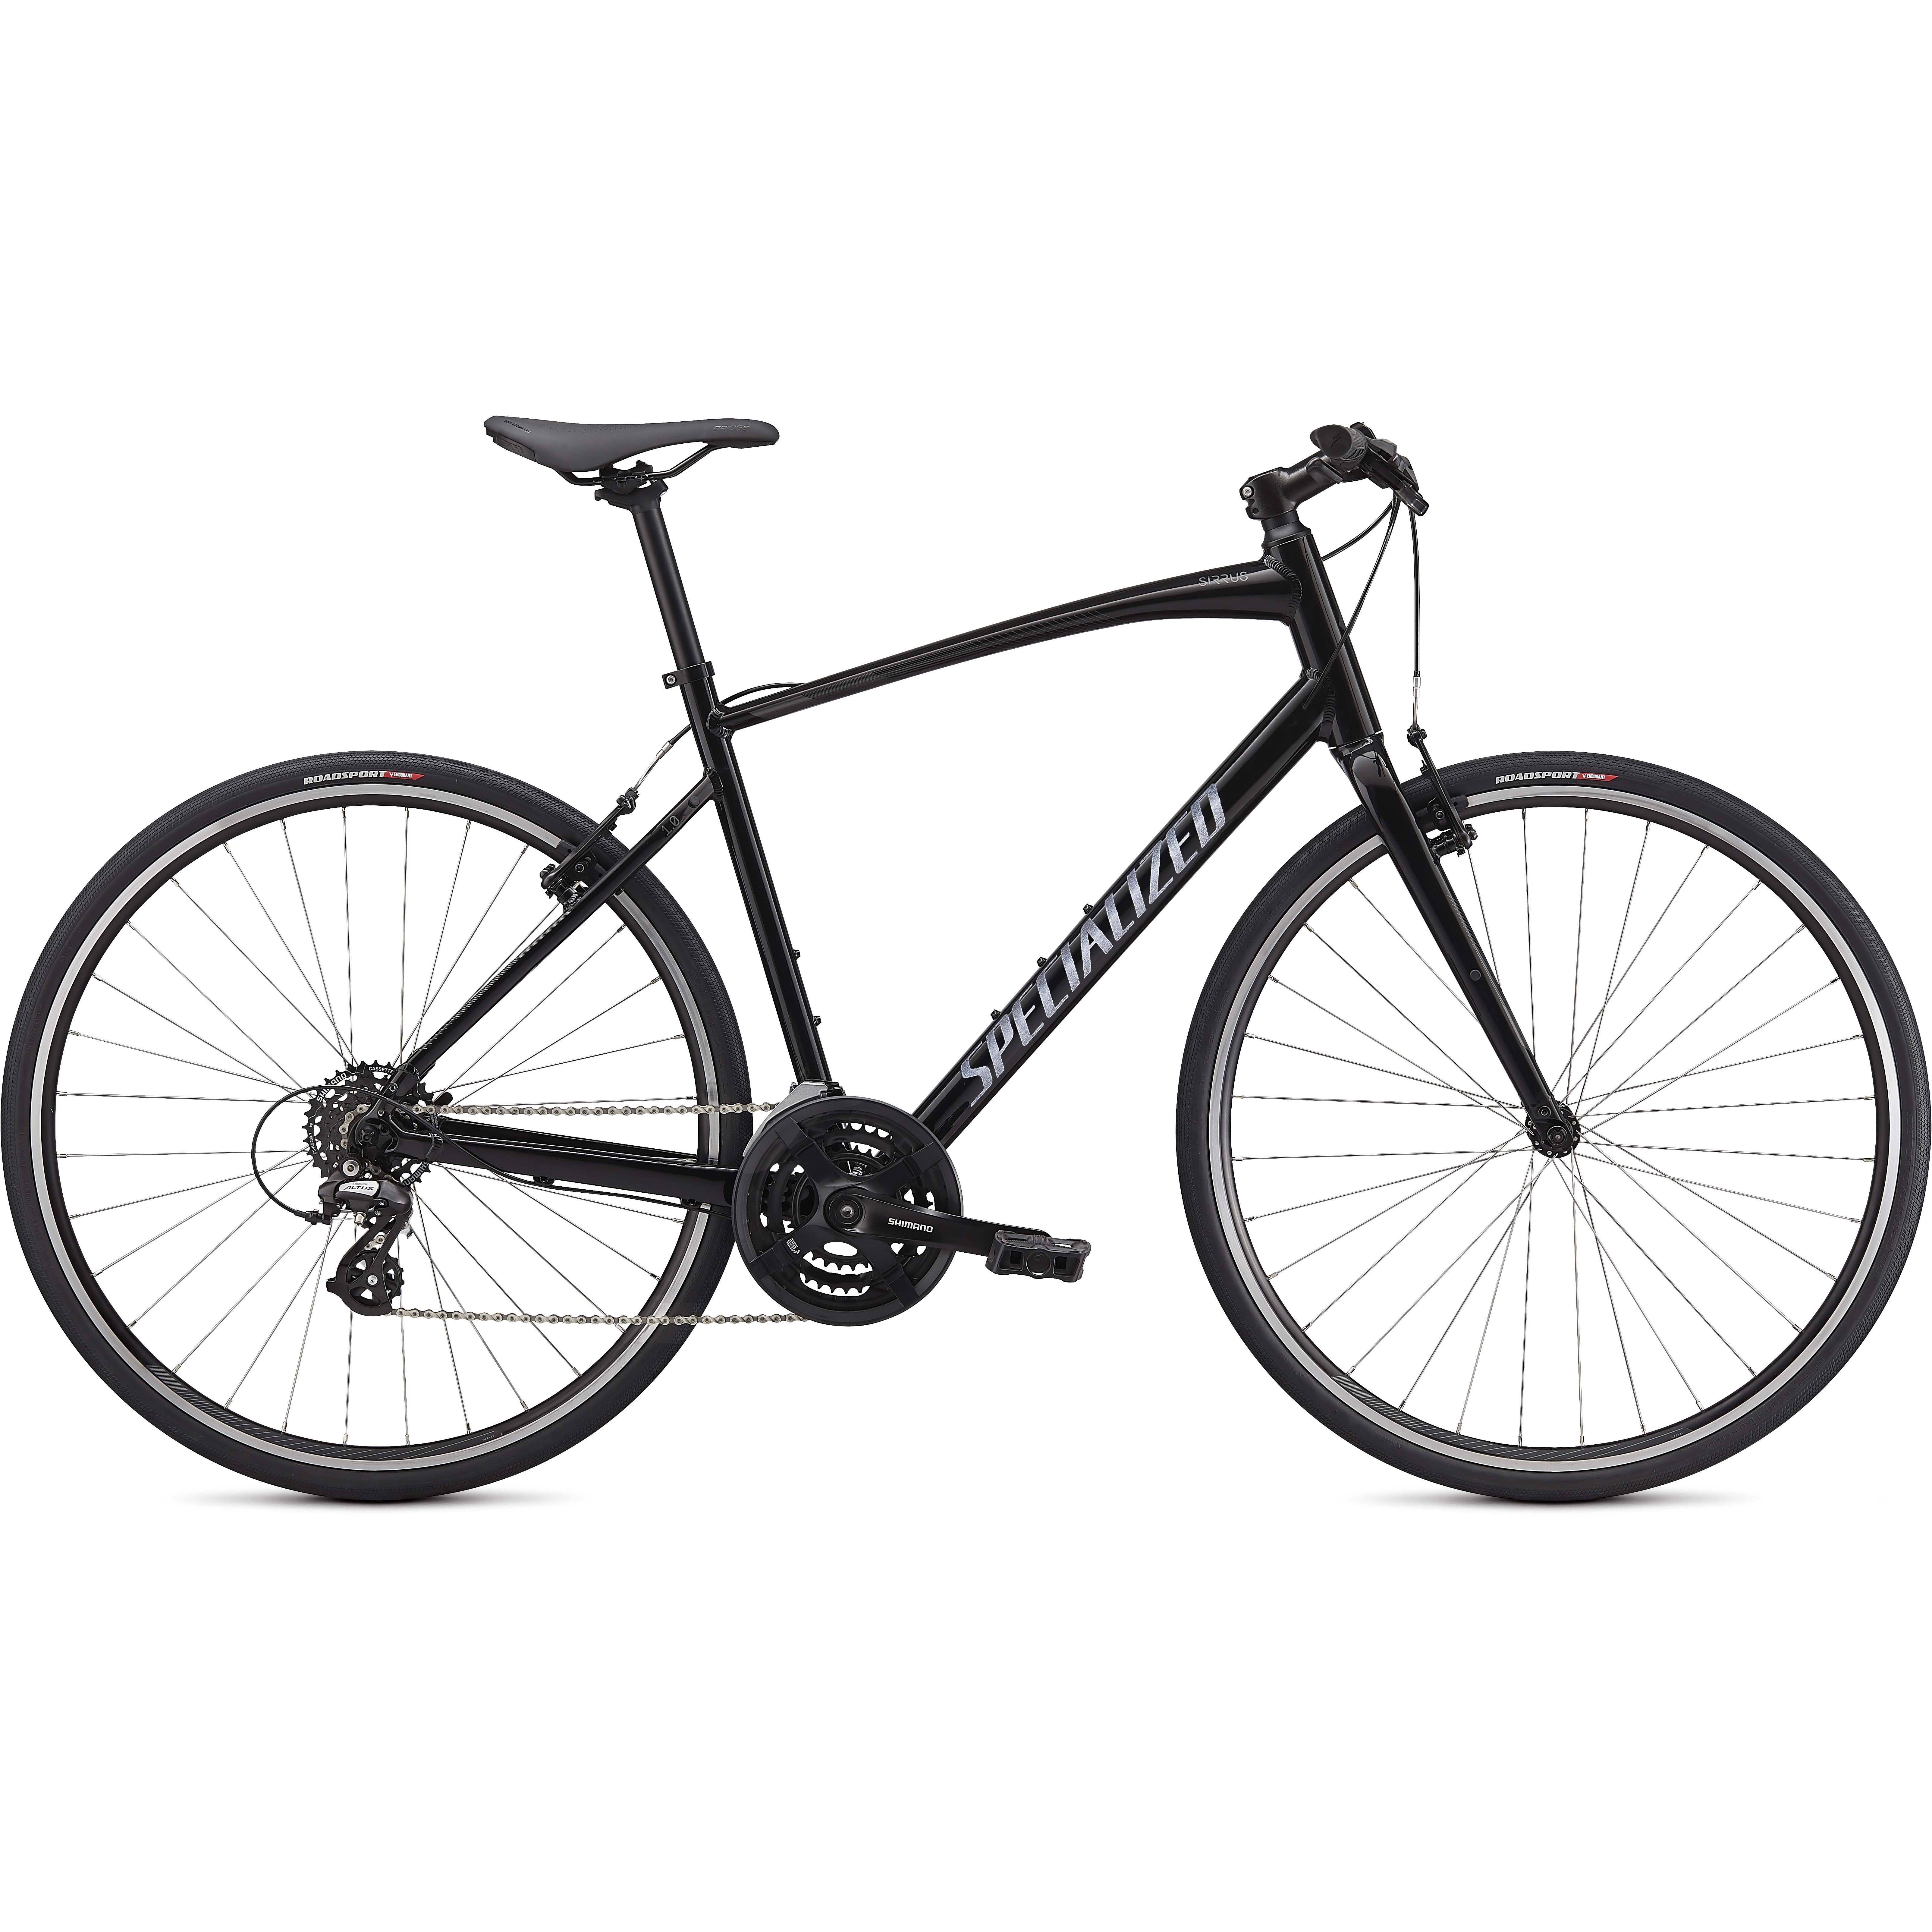 Specialized Sirrus 1.0 - X-Small - Gloss Black/Charcoal